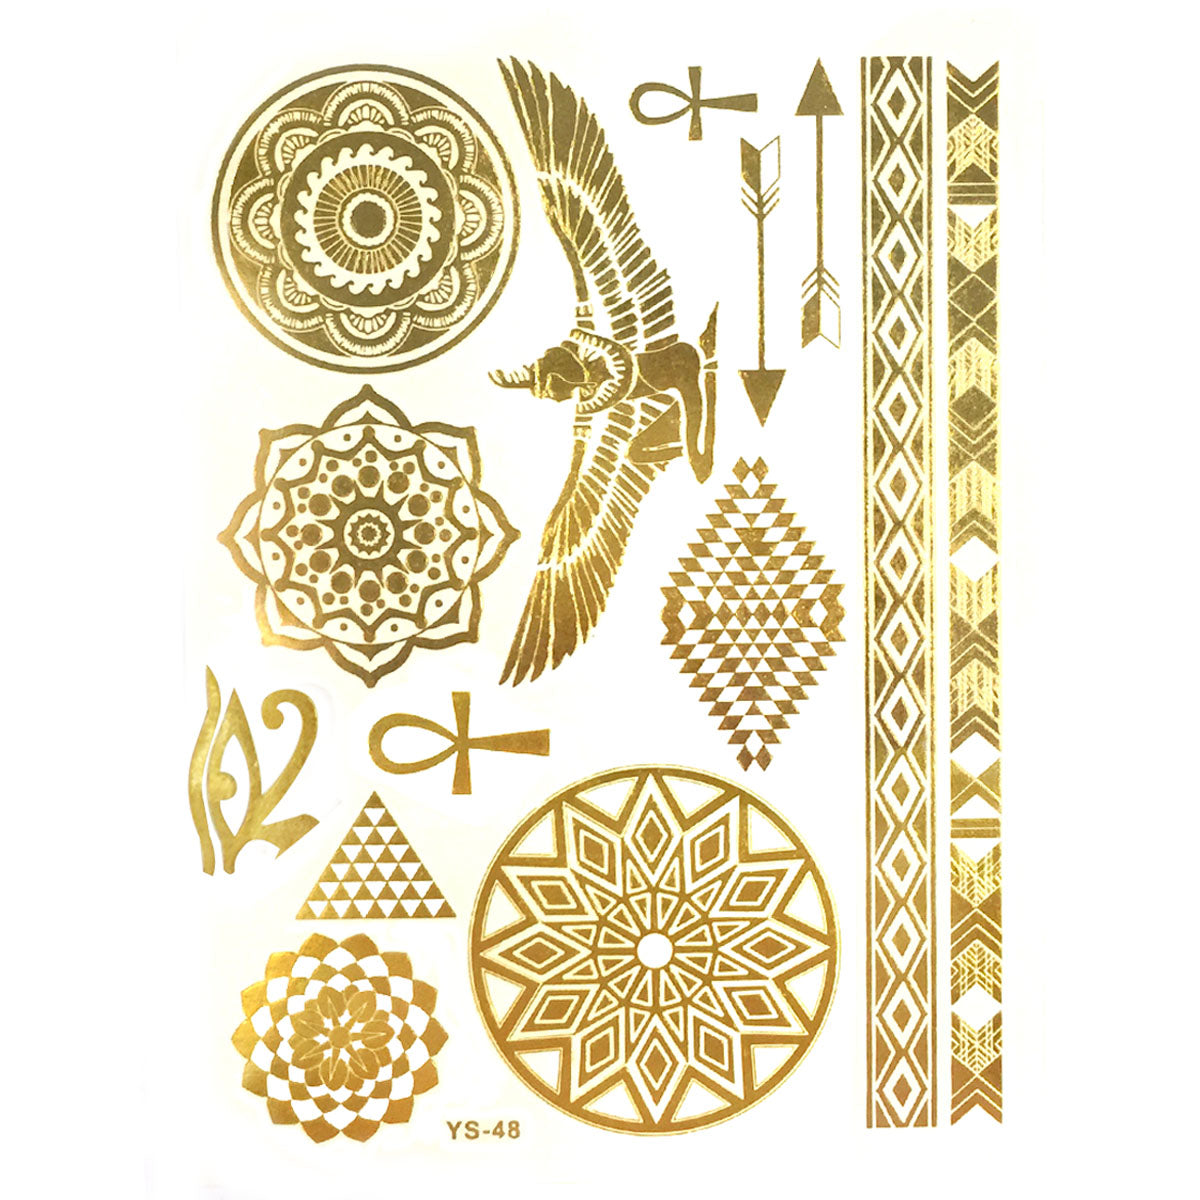 Amazon.com : Metallic Temporary Tattoos for Women Teens Girls 12 Sheets  120+pcs Tattoos Gold Silver Glitter Flash Waterproof Tattoo Stickers for  Beach, Festivals, Parties : Beauty & Personal Care